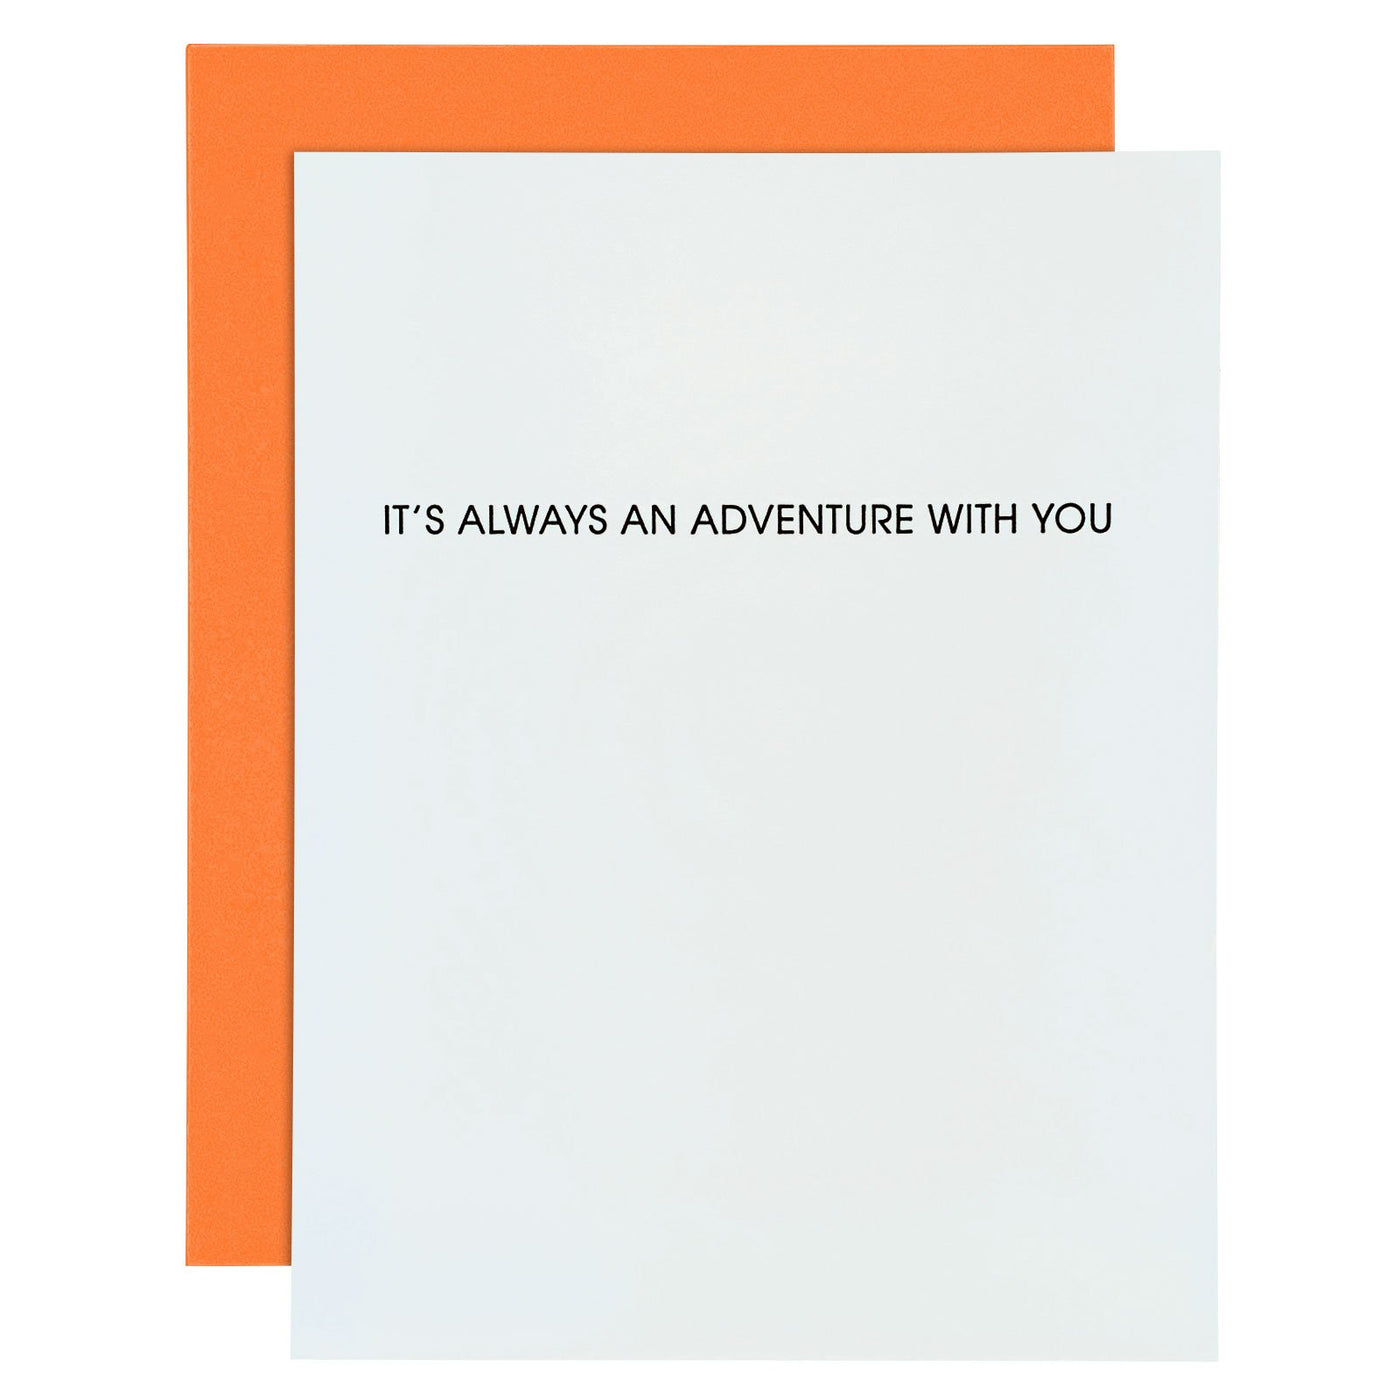 GREETING CARD "ALWAYS AN ADVENTURE WITH YOU"